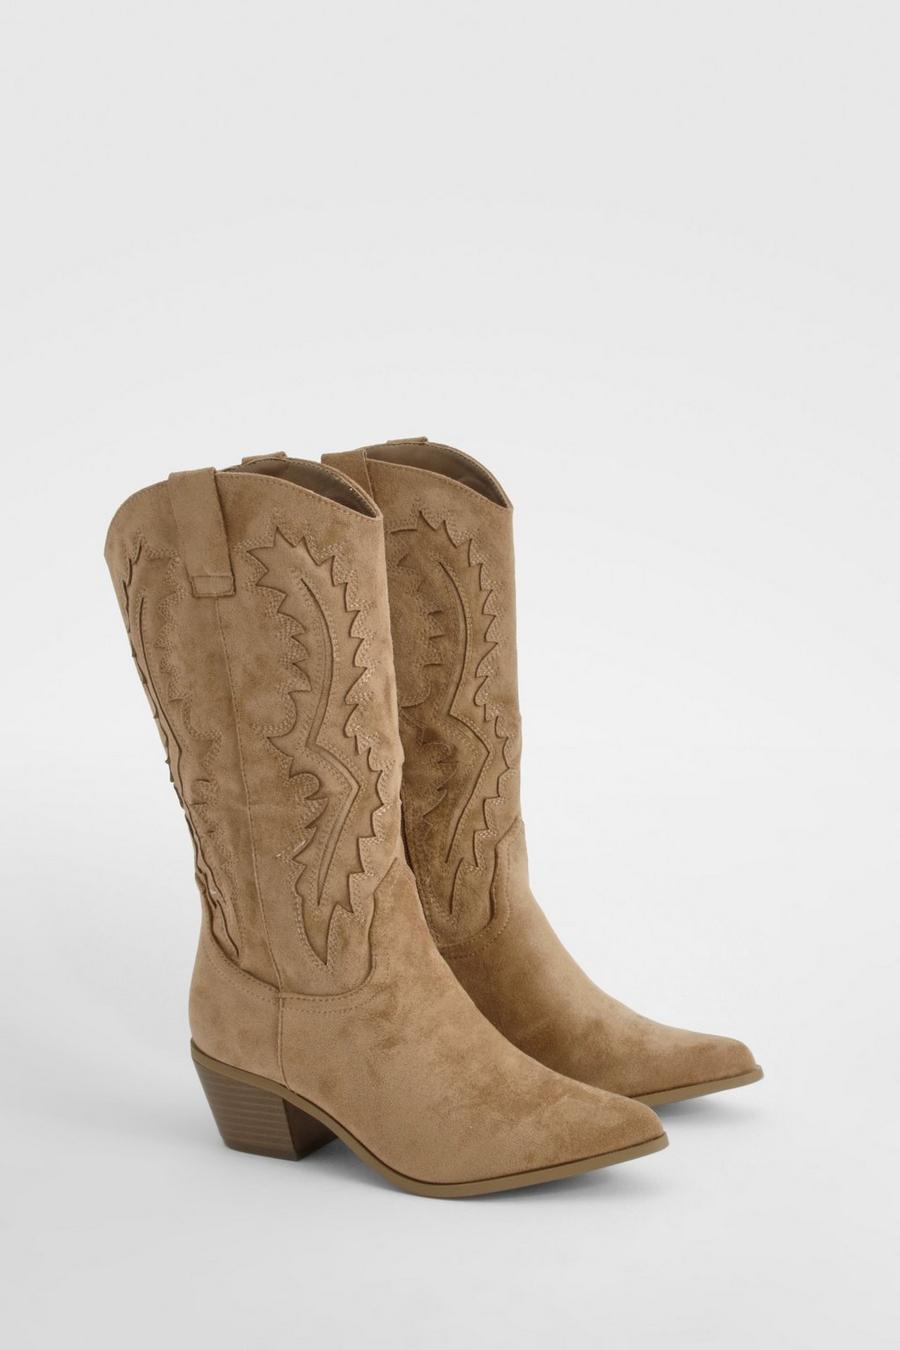 Camel Embroidered Western Cowboy Boots       